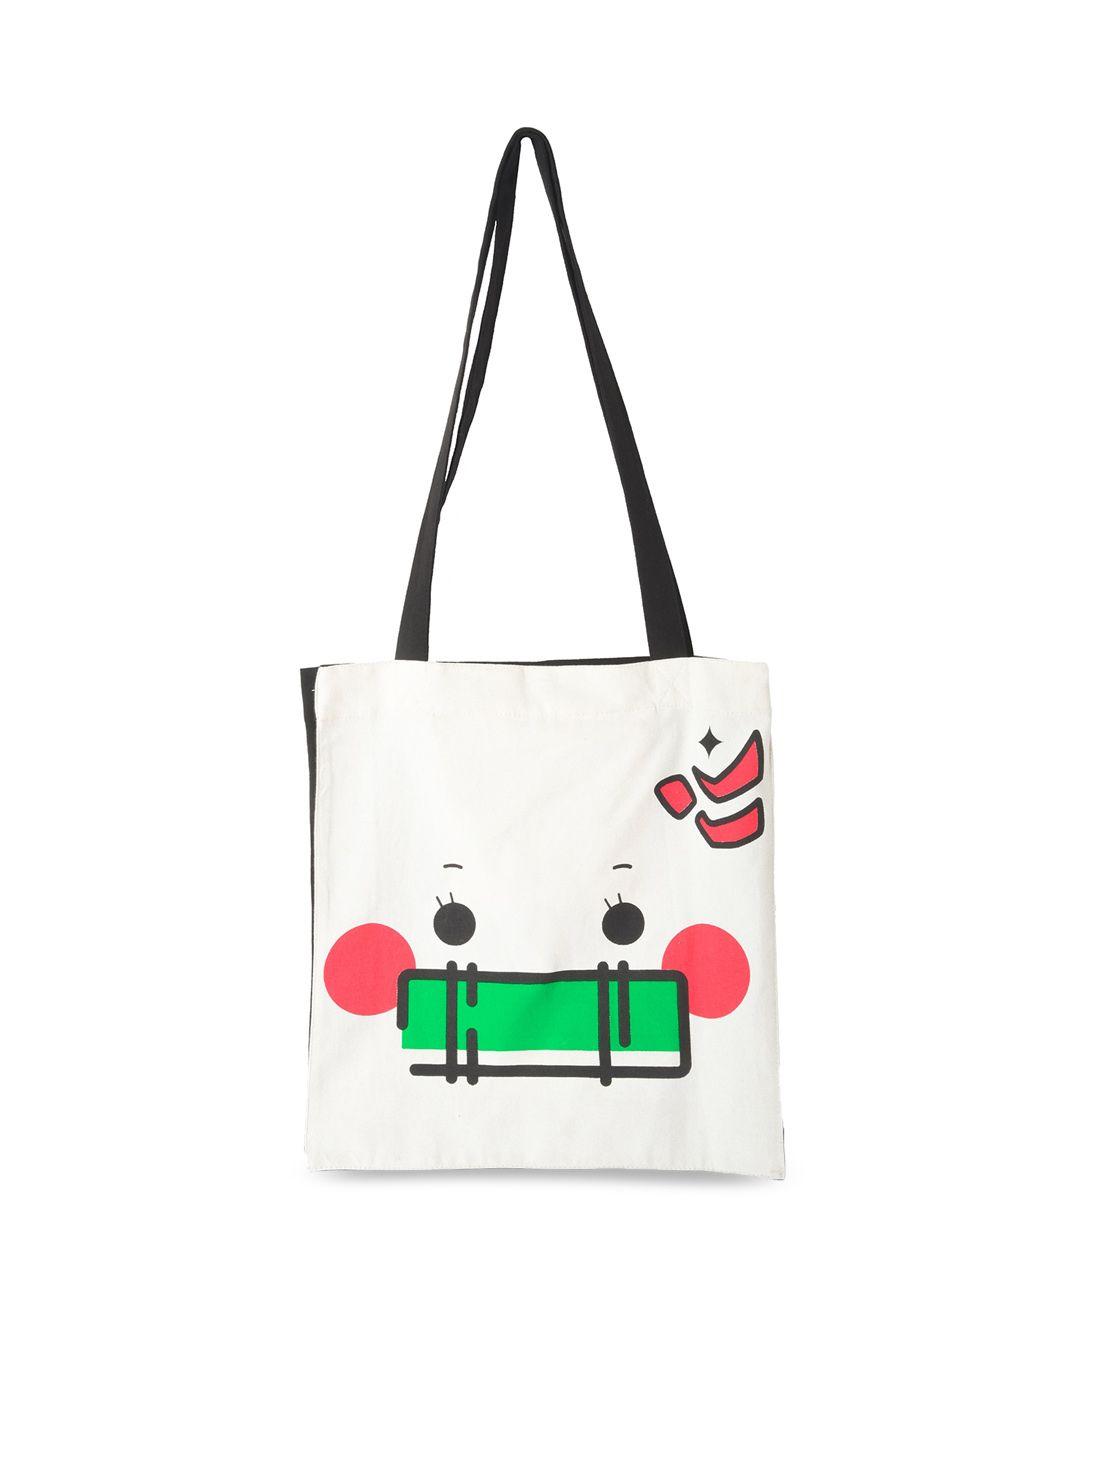 comicsense multicoloured embellished structured tote bag with applique